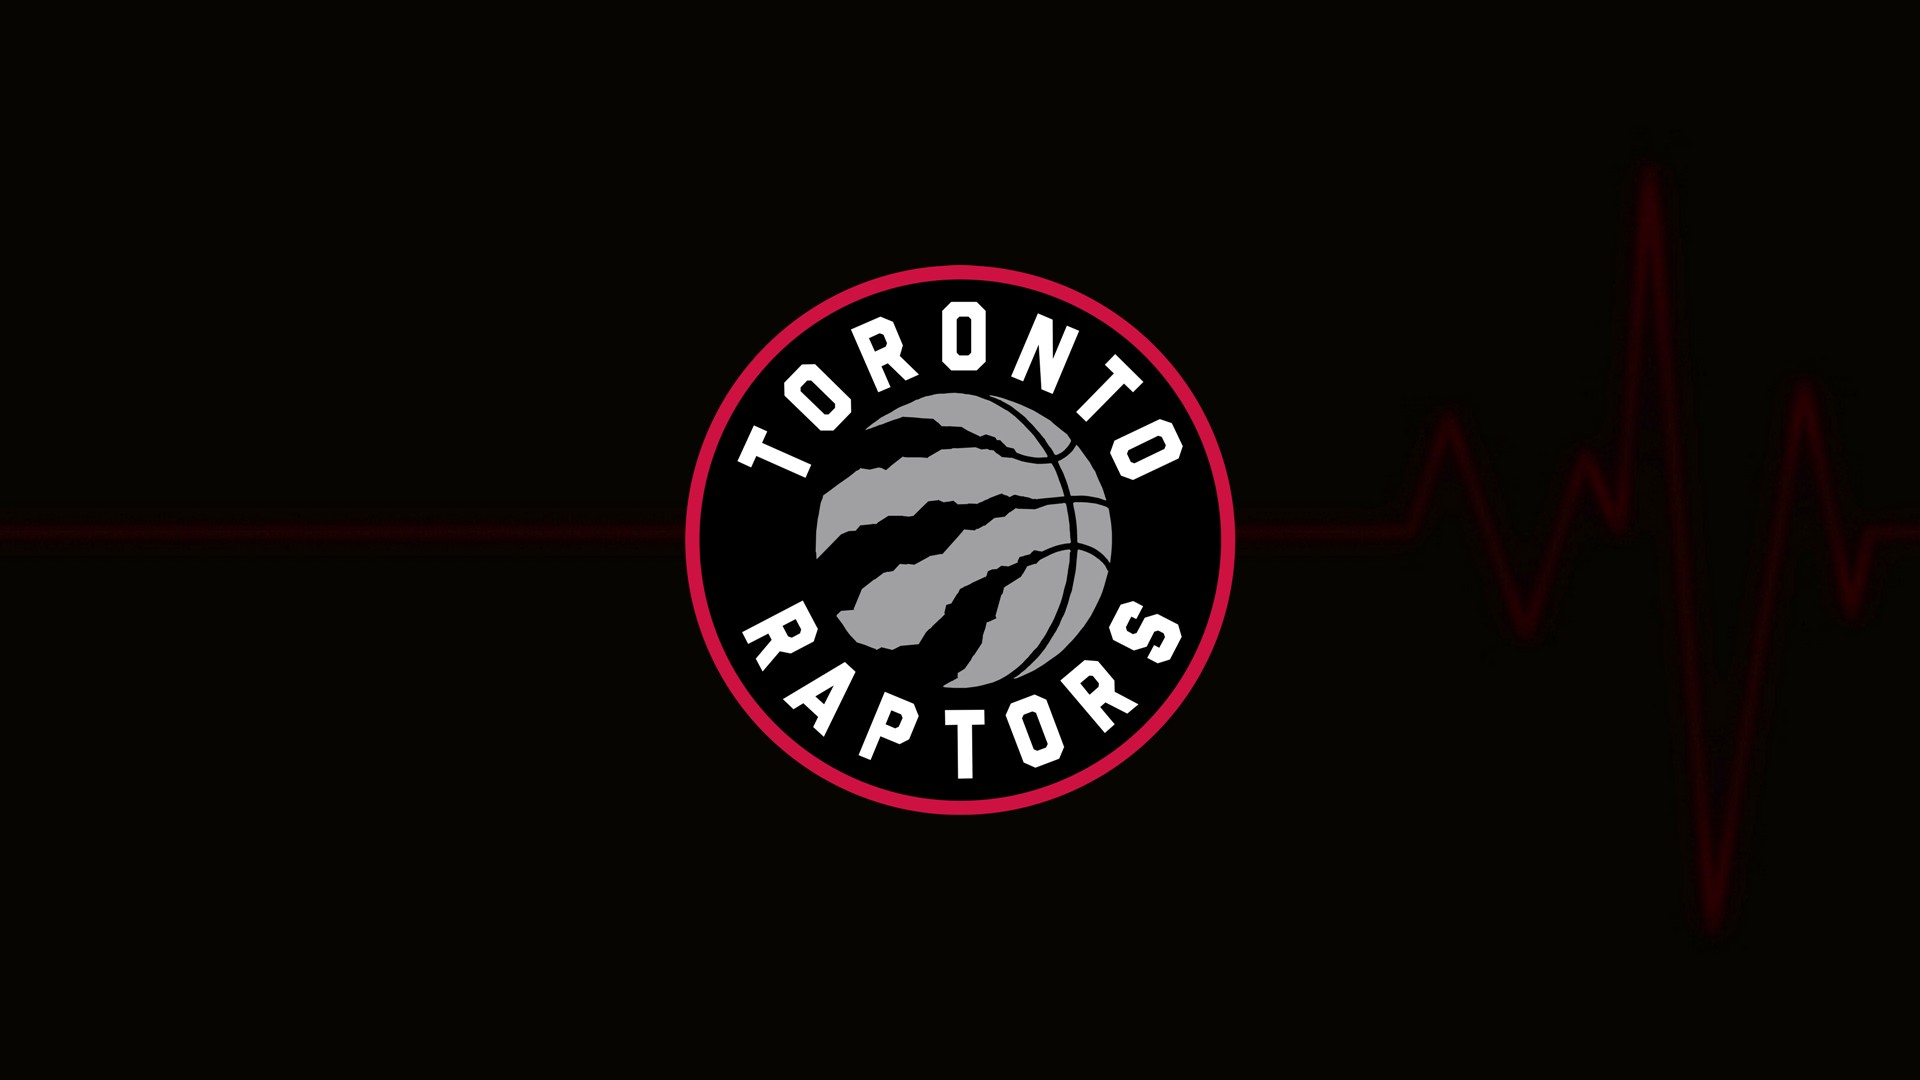 HD Raptors Basketball Backgrounds with image dimensions 1920x1080 pixel. You can make this wallpaper for your Desktop Computer Backgrounds, Windows or Mac Screensavers, iPhone Lock screen, Tablet or Android and another Mobile Phone device